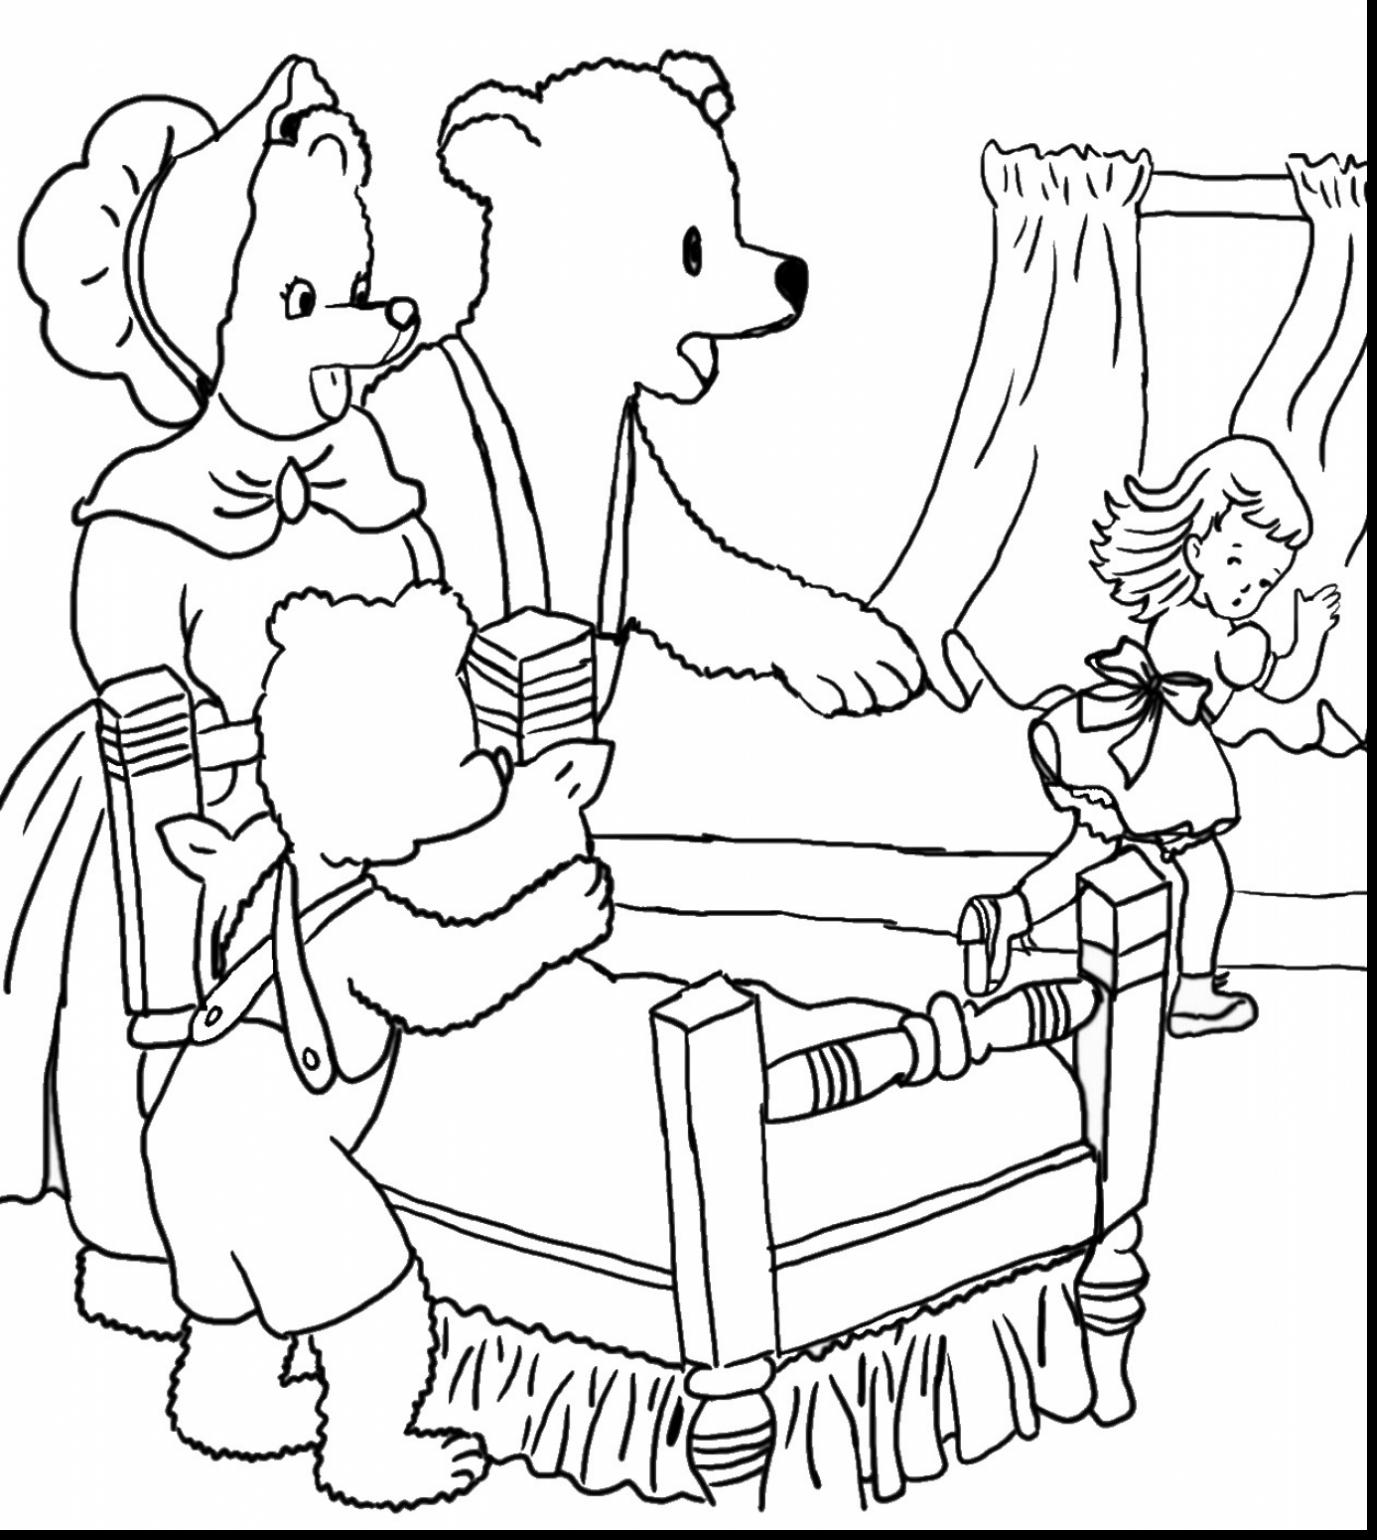 Goldilocks And The Three Bears Coloring Pages Free at